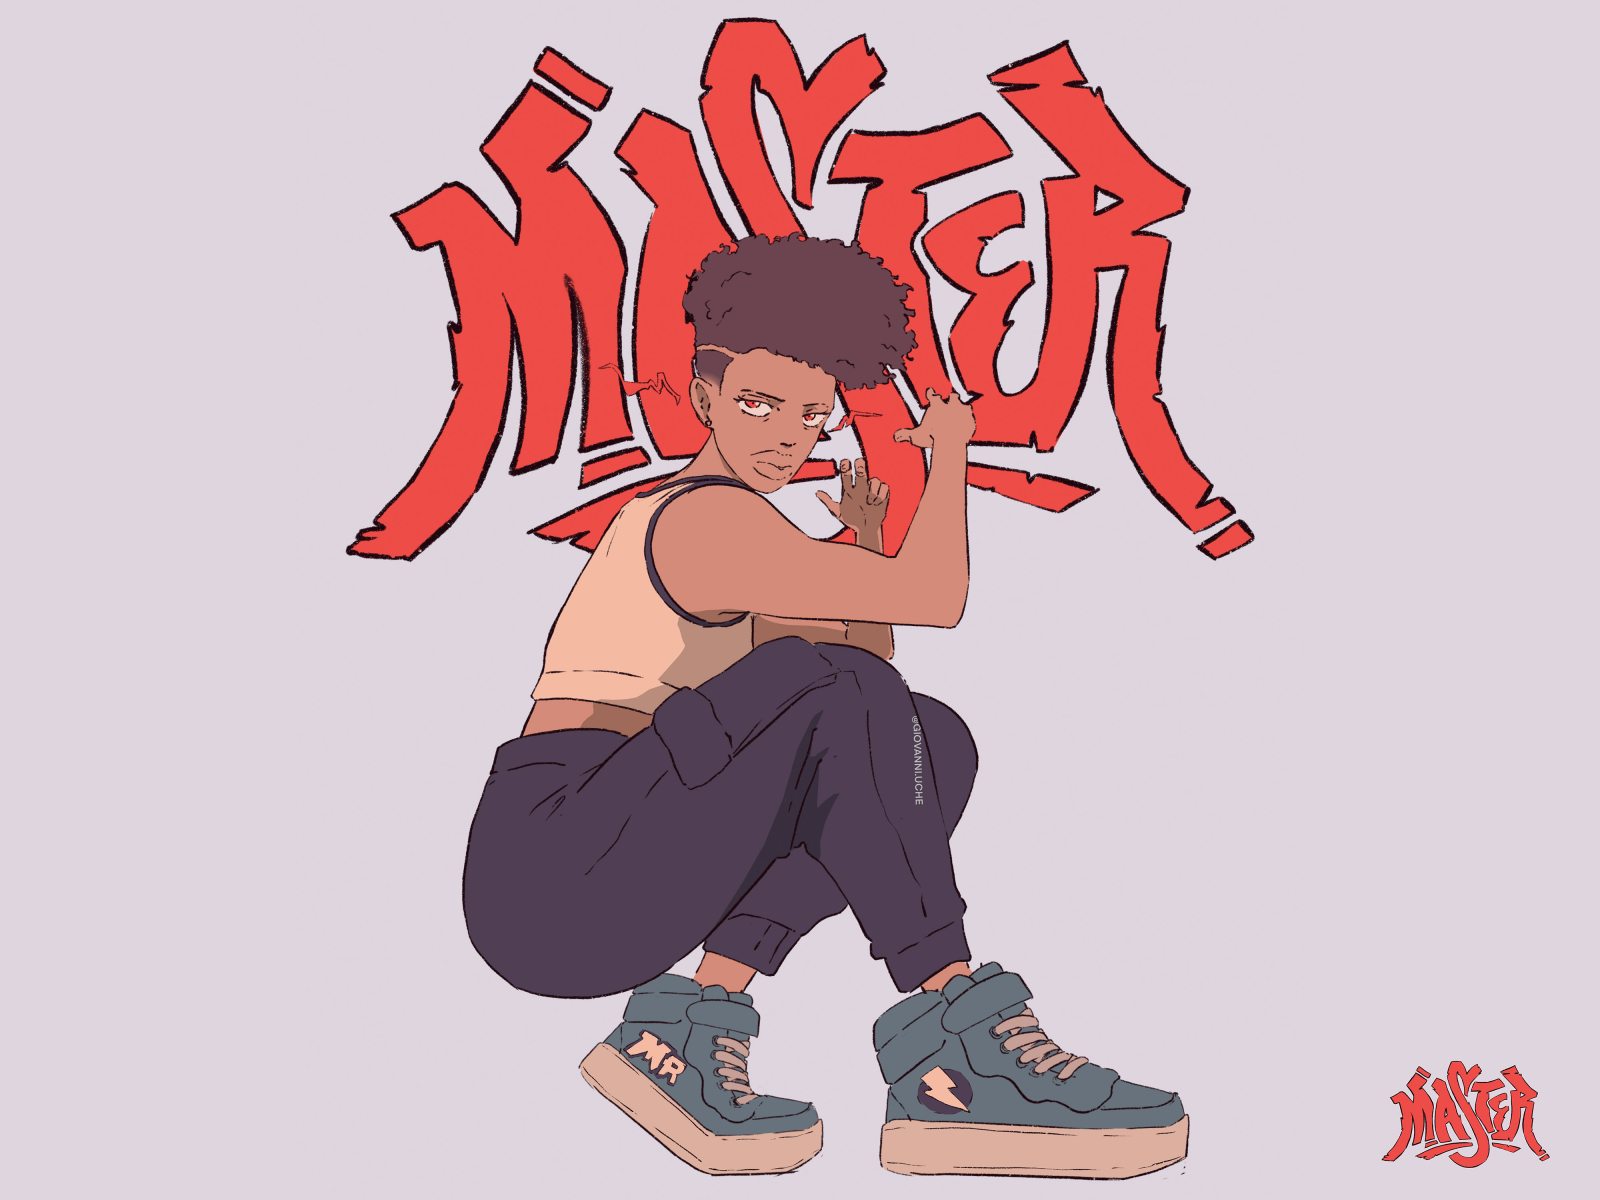 Afro from Afro Samurai by Gio U on Dribbble